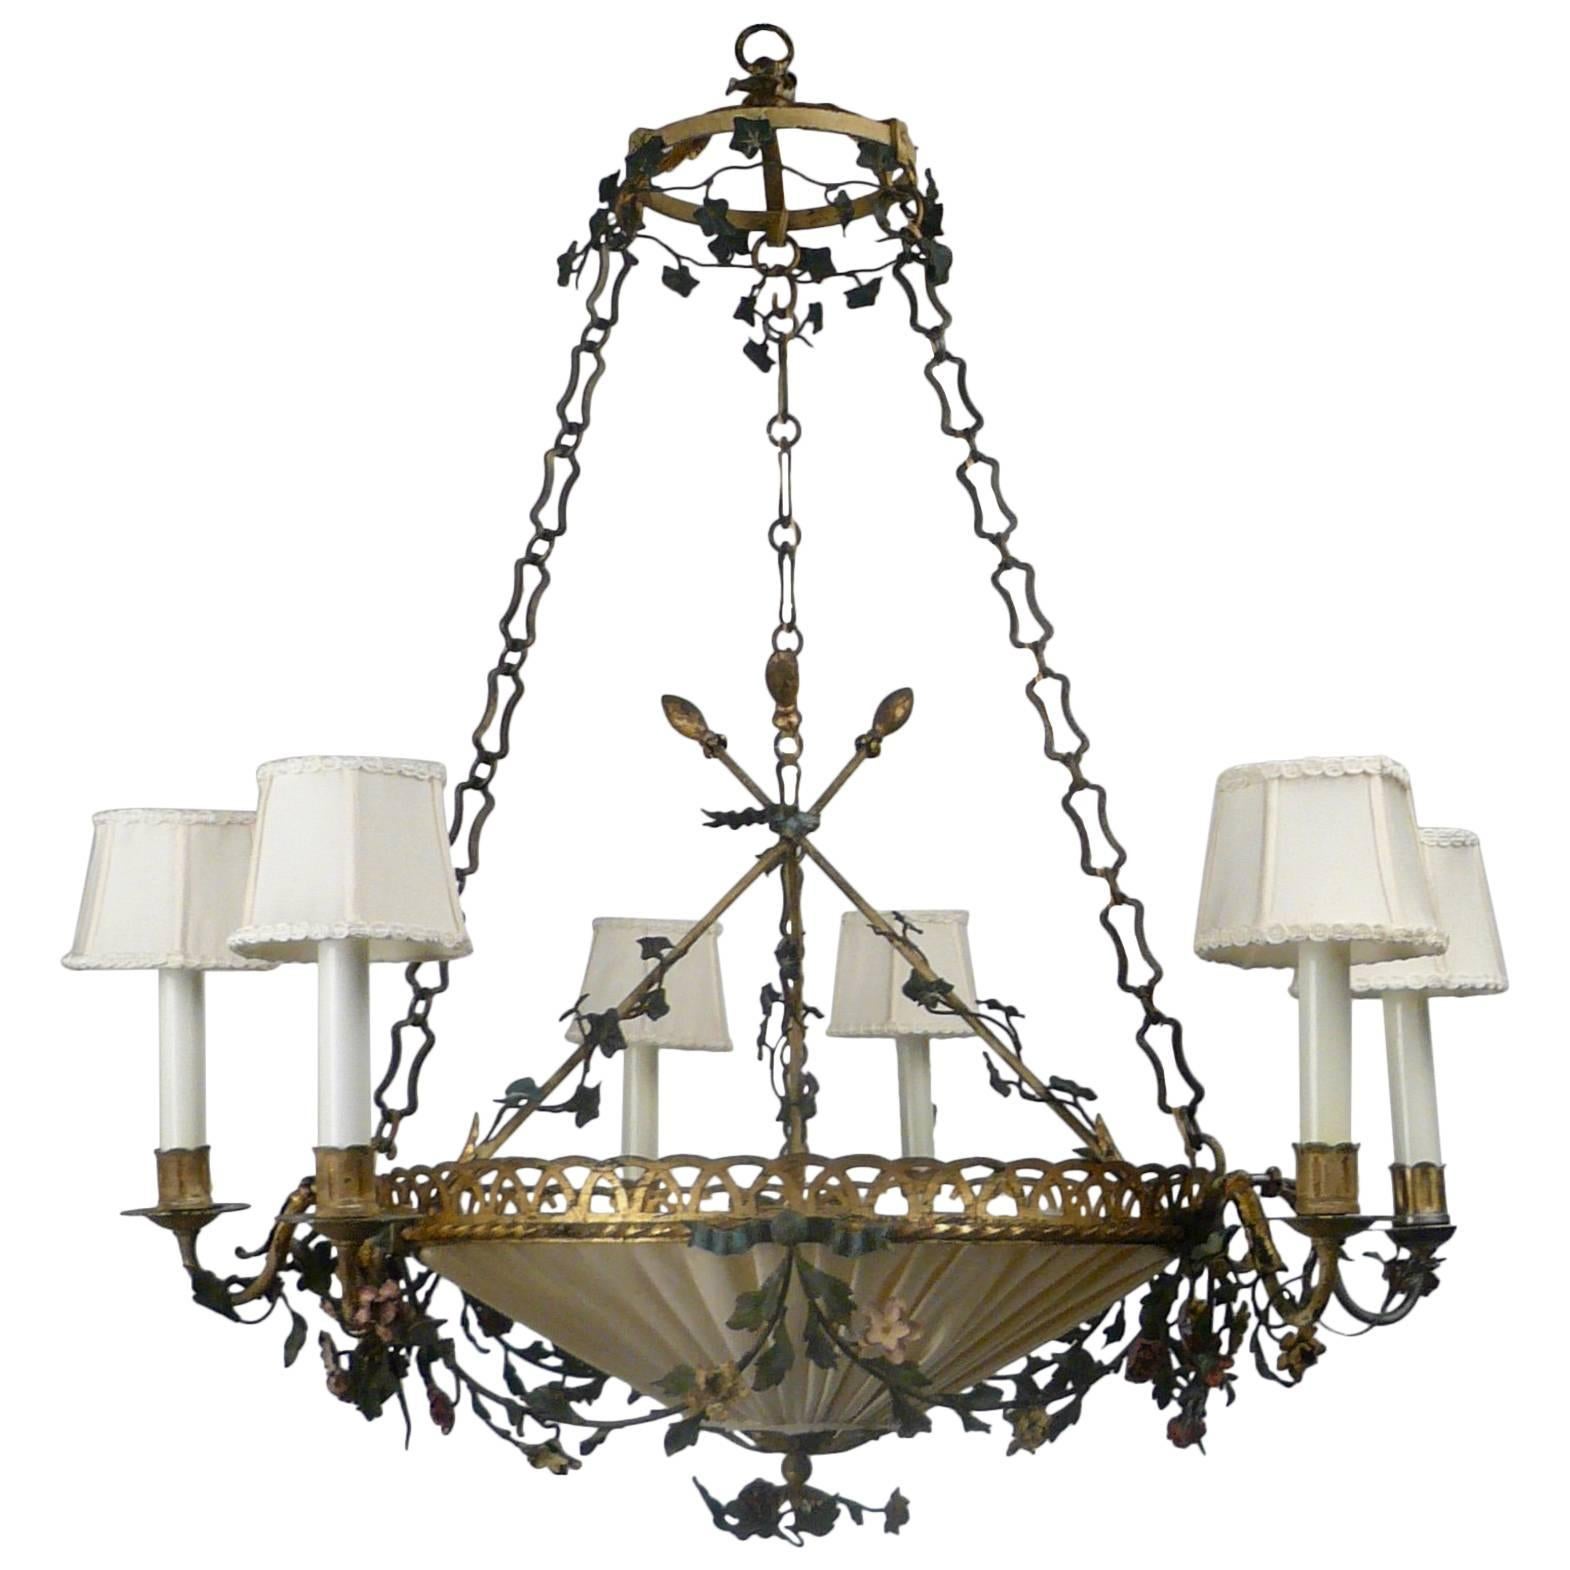 Neoclassical Tole Chandelier